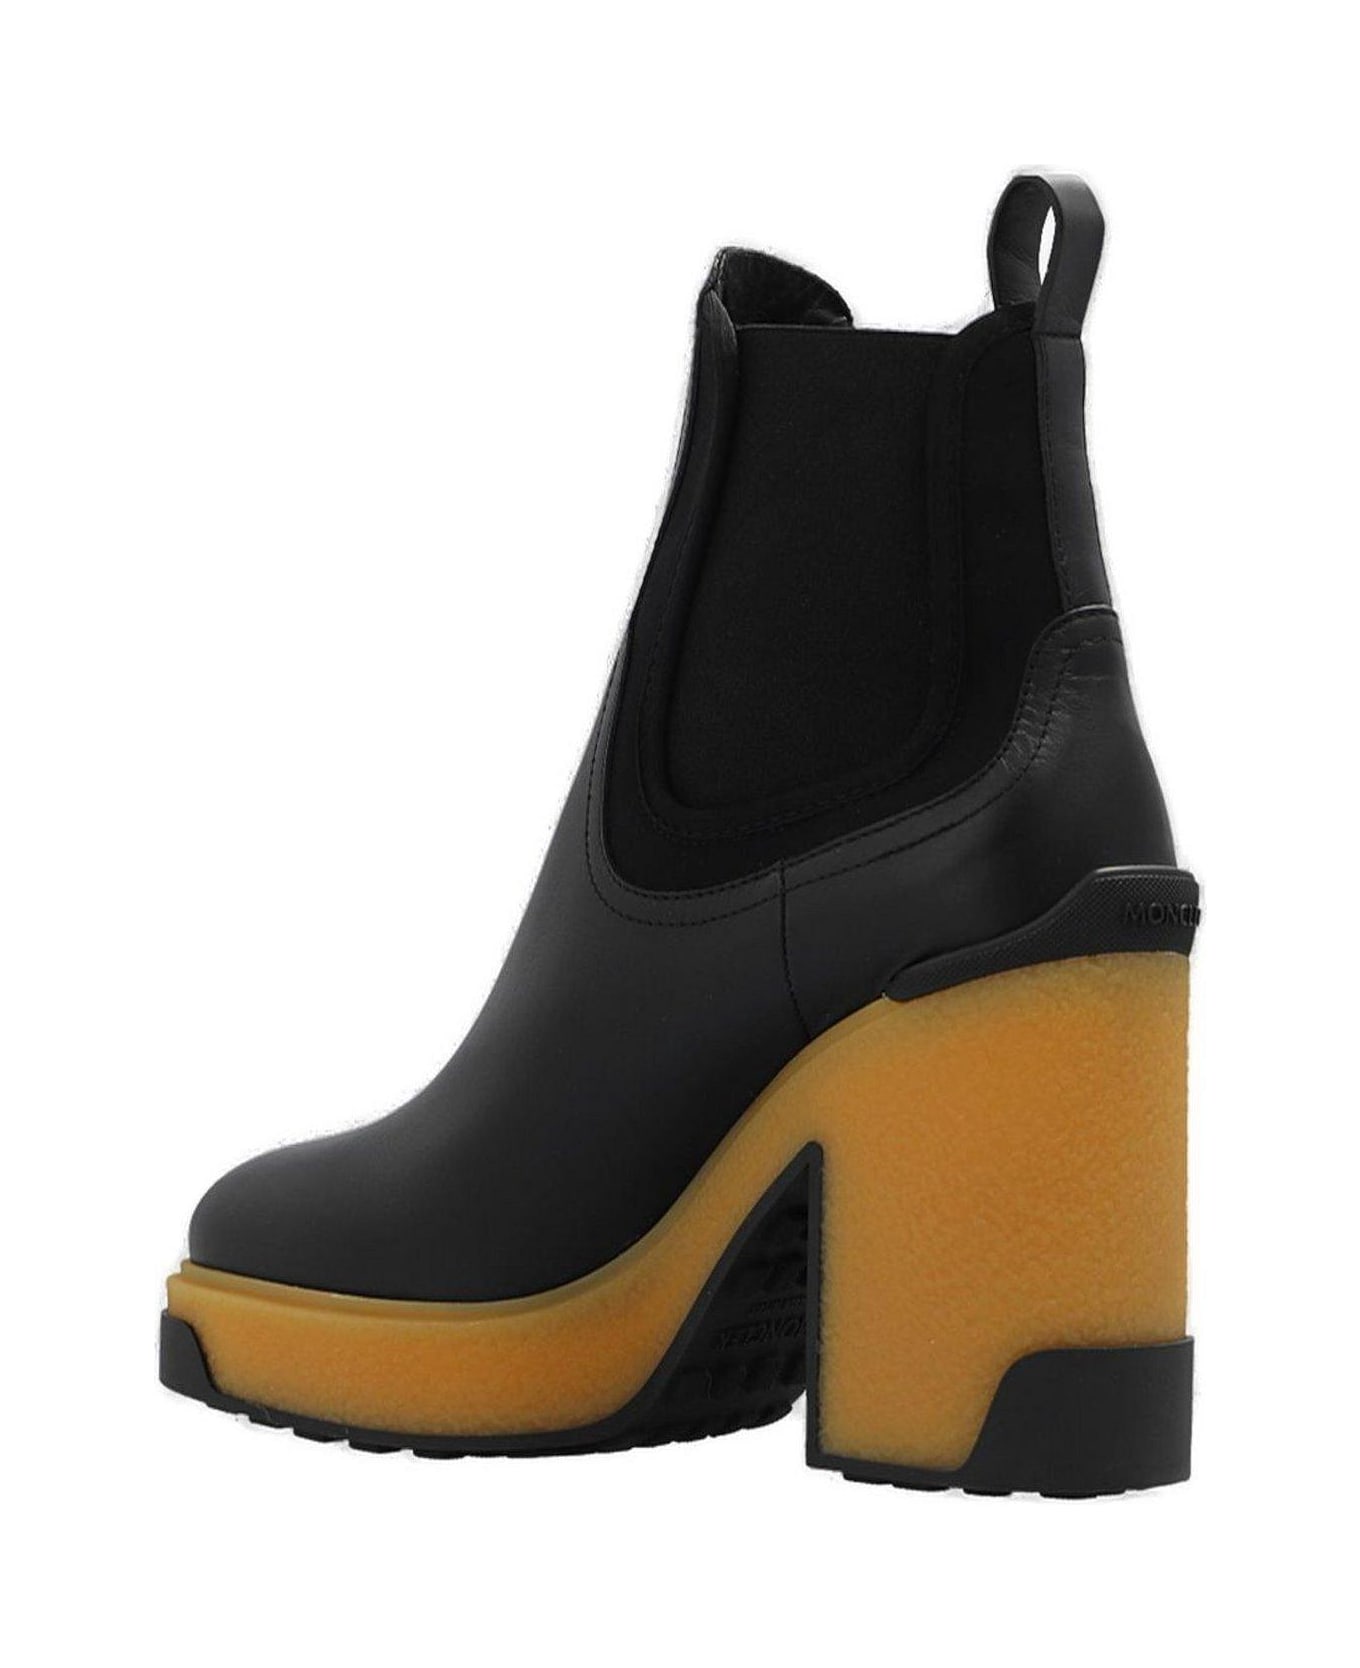 Moncler Isla Heeled Ankle Boots - Black